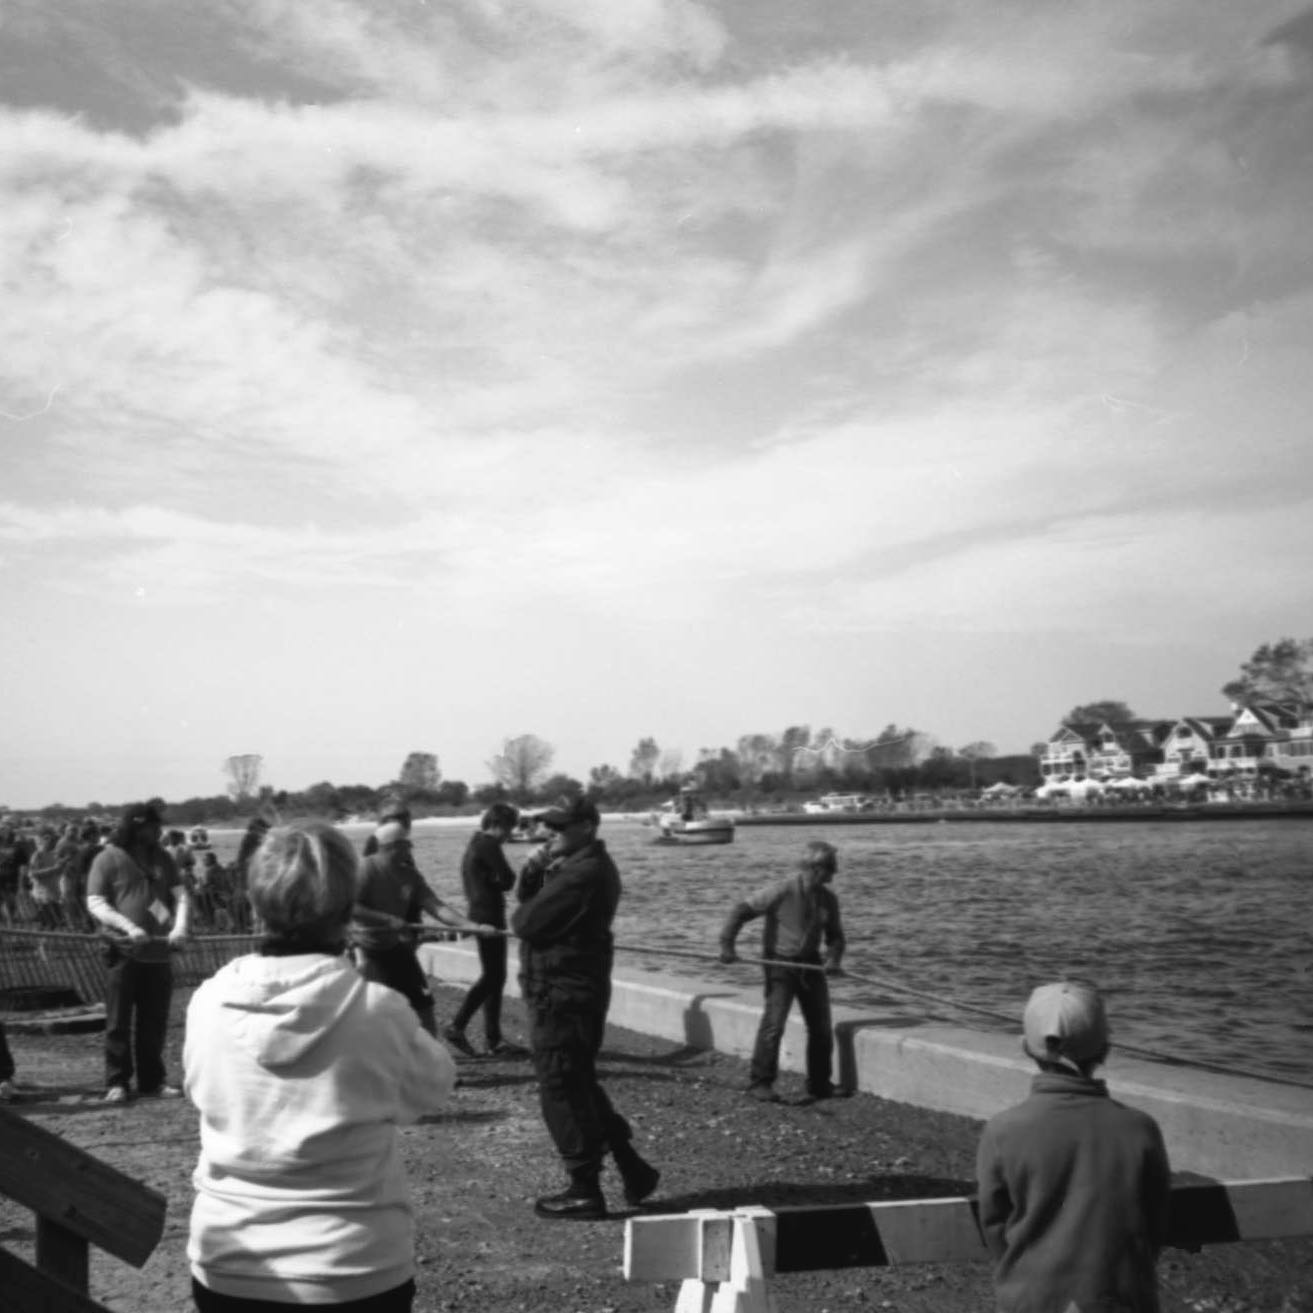 Feeding the line. 
Volunteers feed the tug-o-war line out as the boat takes it to the middle of the inlet for the Point Pleasant Beach-Manasquan cross-inlet tug-o-war a few weeks ago. Gotta keep life on the shore interesting during the off-season... #olympusxa #filmferrania #filmferraniap30 #rodinal #labbox #film #filmphotography #filmphotographic